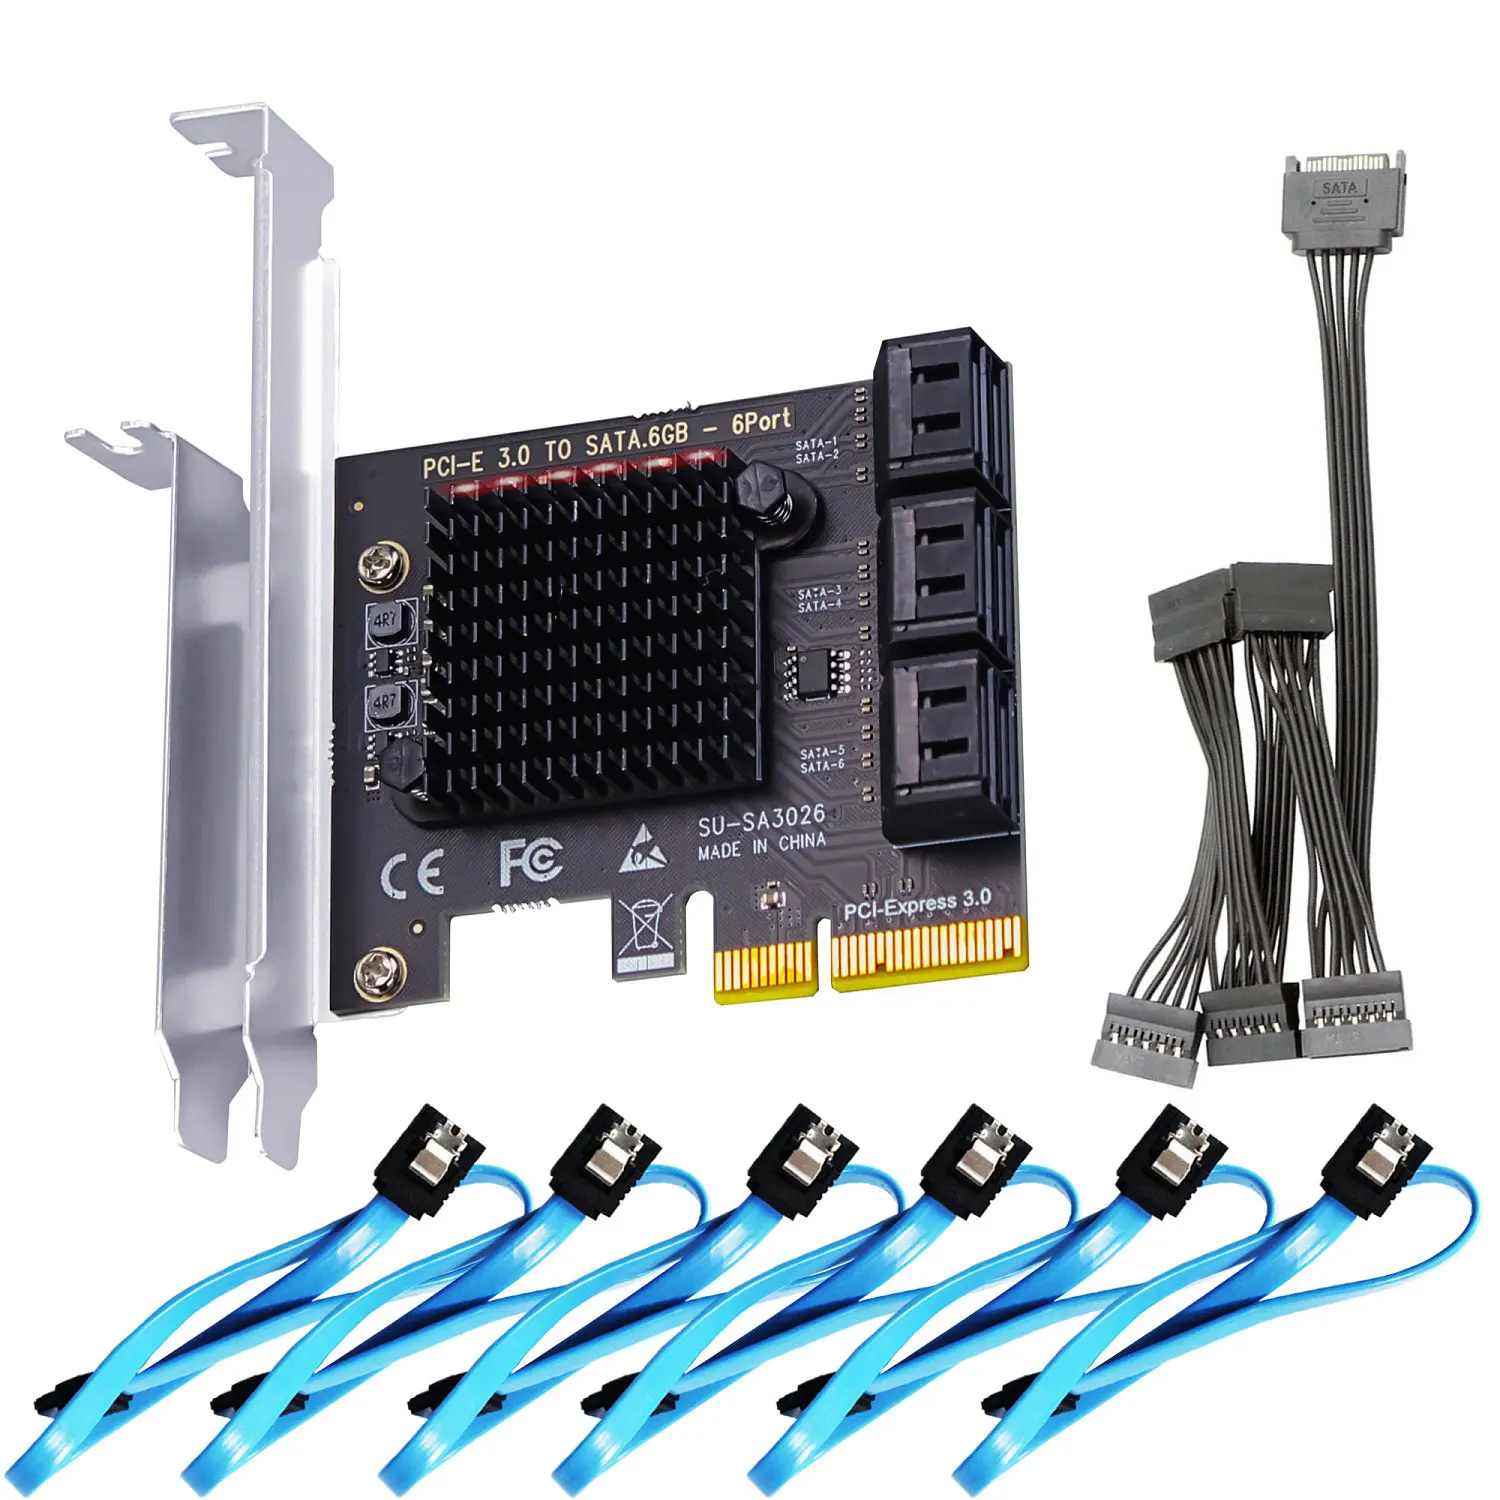 PCIe SATA Adapter Card with 6 Port SATA III 6Gbps (Including SATA Cables and 1:5 SATA Splitter Power Cable)